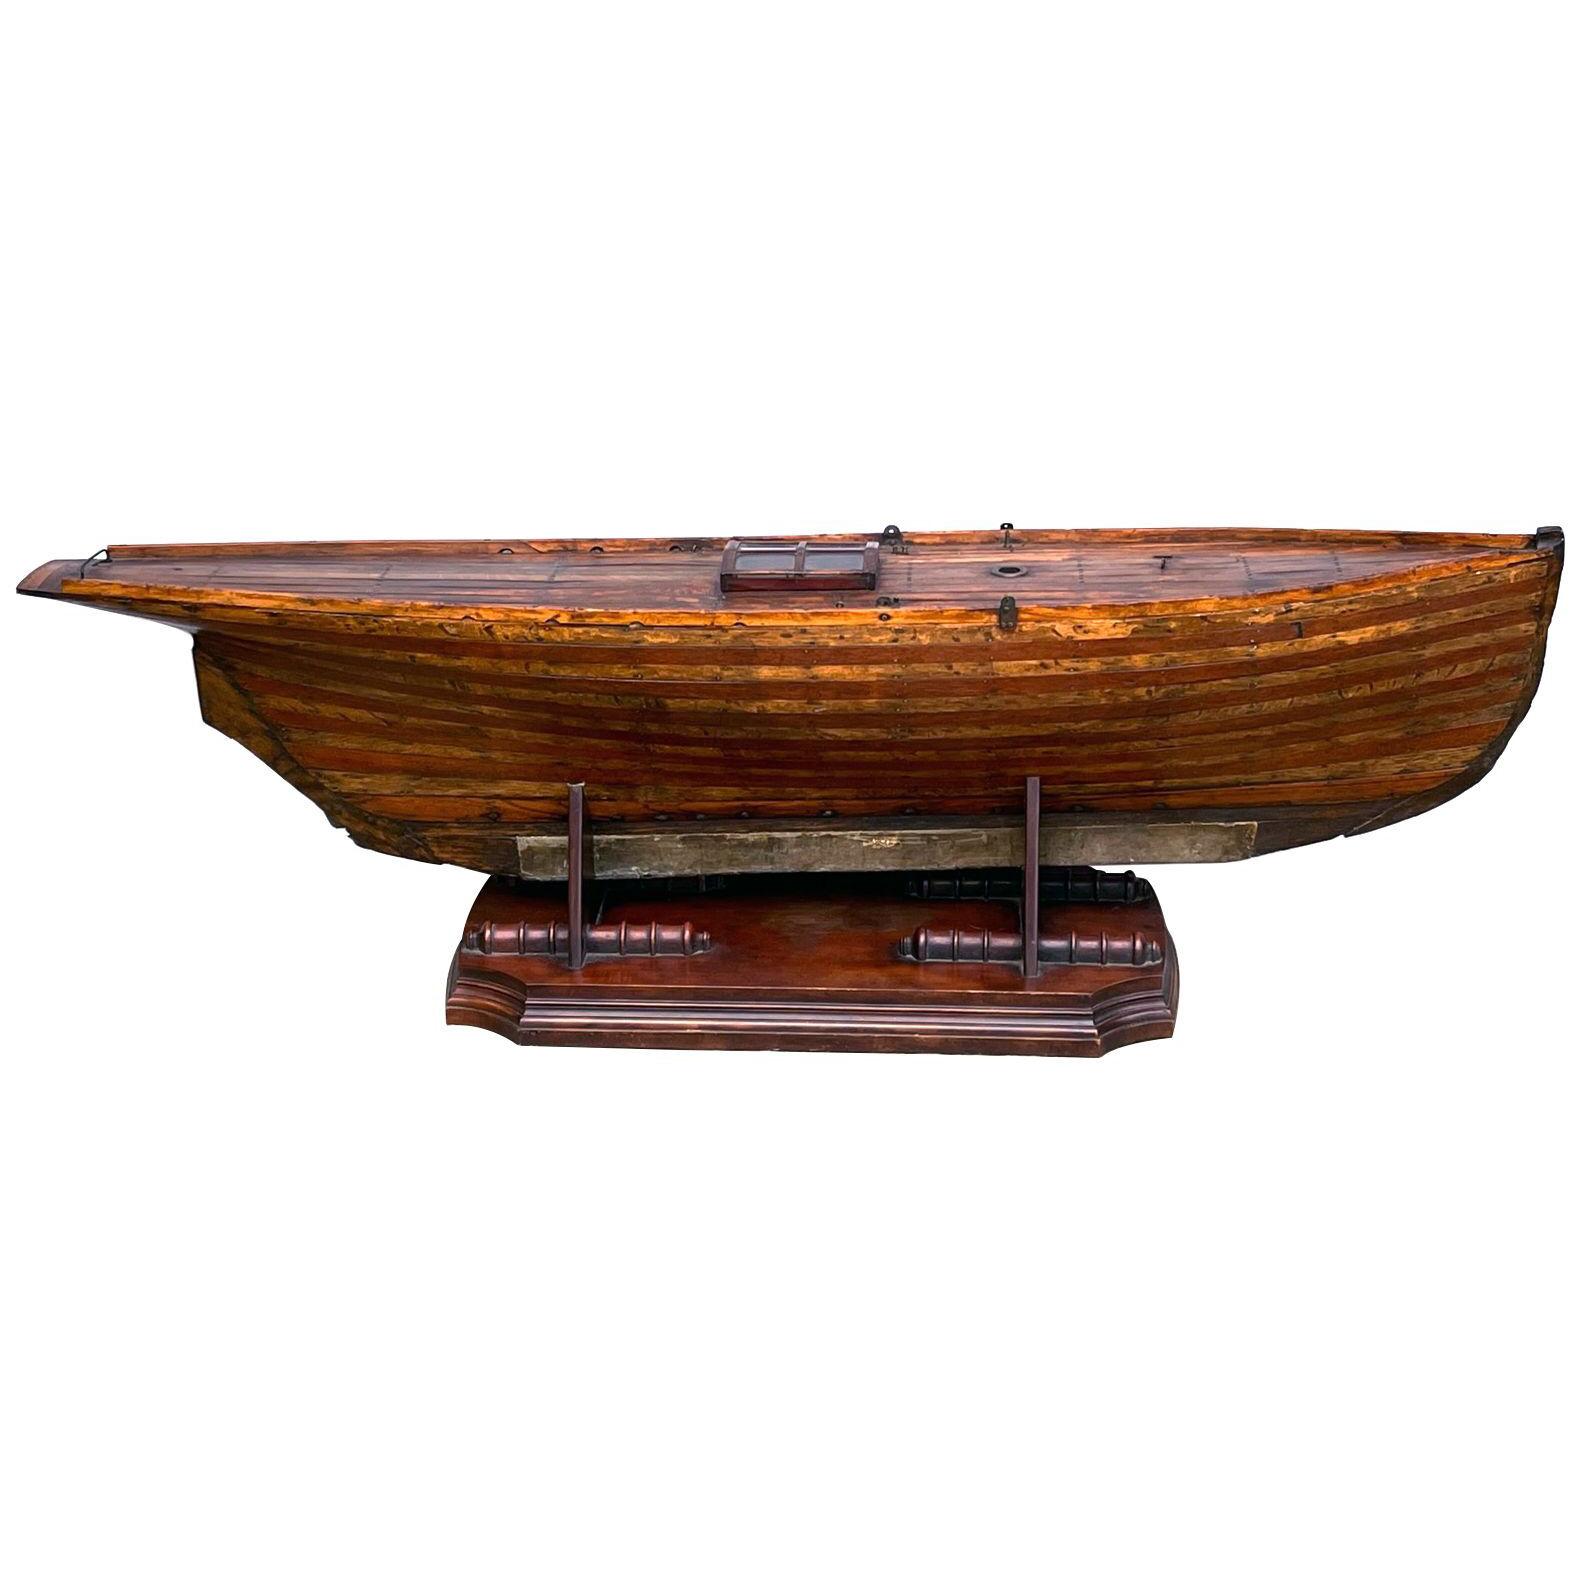 Large 19th century ship model or pond yacht hull